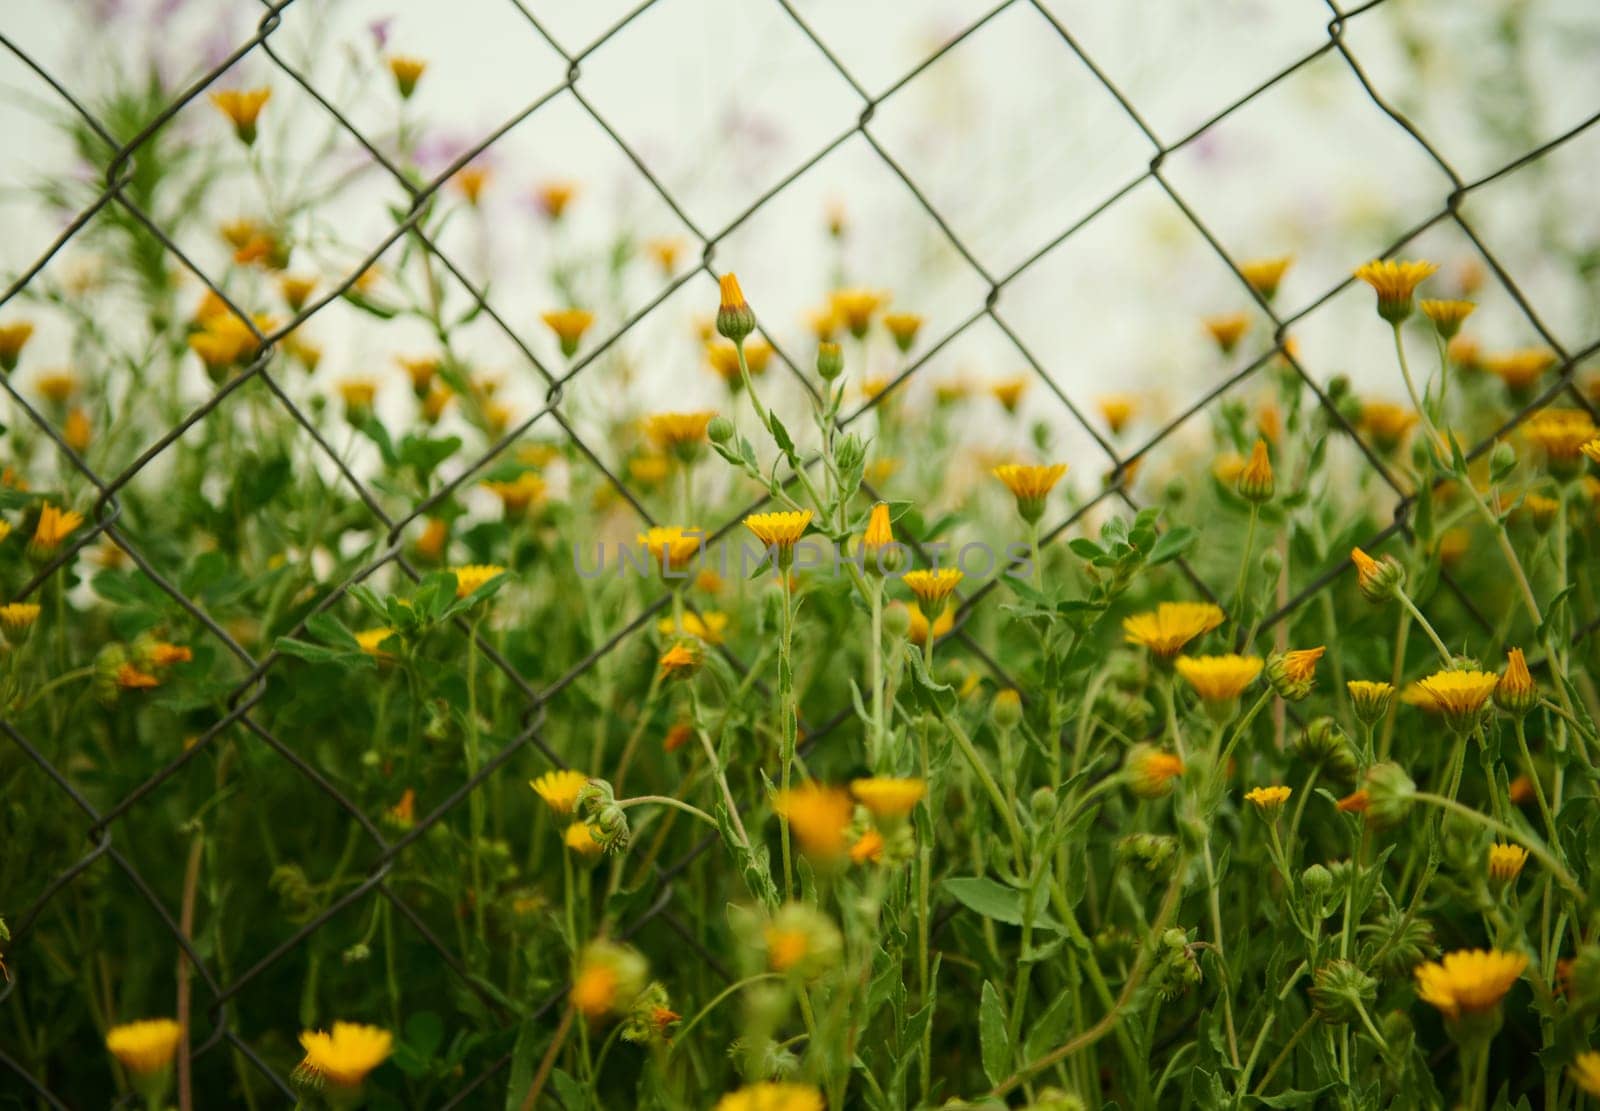 Medicinal calendula flowers growing in the field in the meadow in mountains over metal fence background. Nature background. Herbal medicine